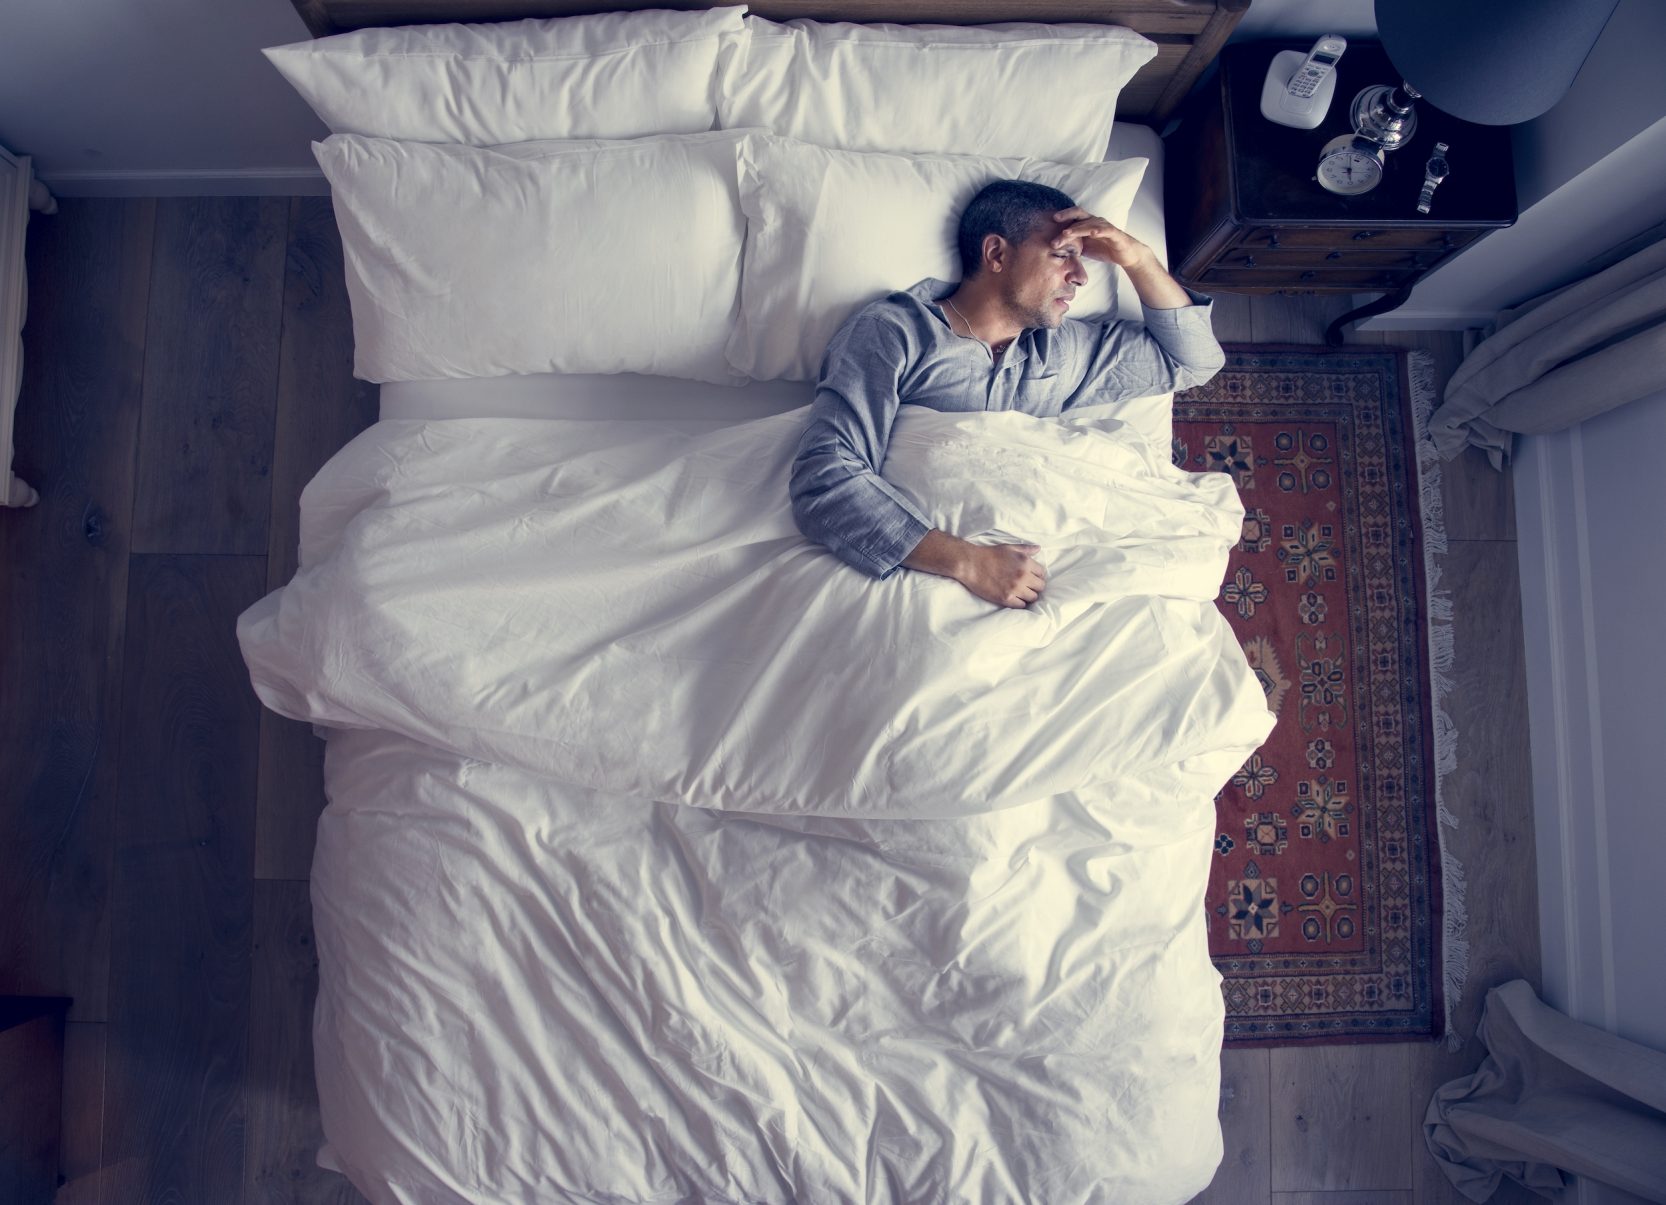 Does exercise before going to bed affect sleep?